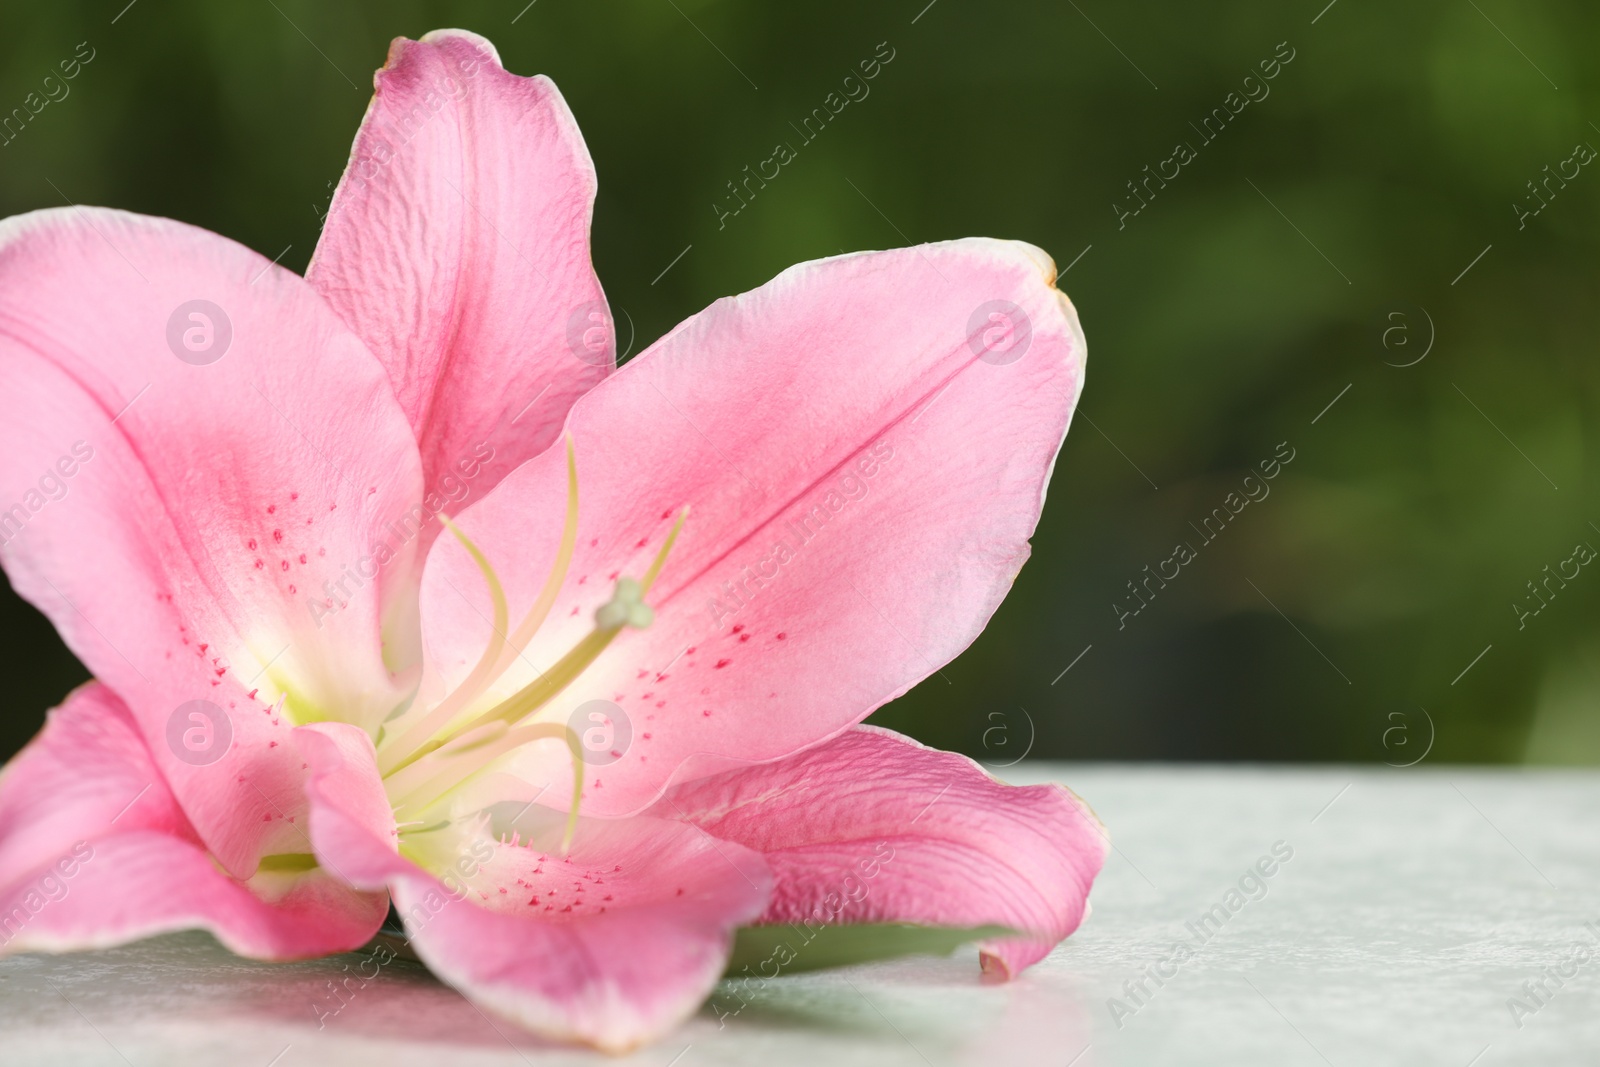 Photo of Beautiful pink lily flower on white table against blurred green background, closeup